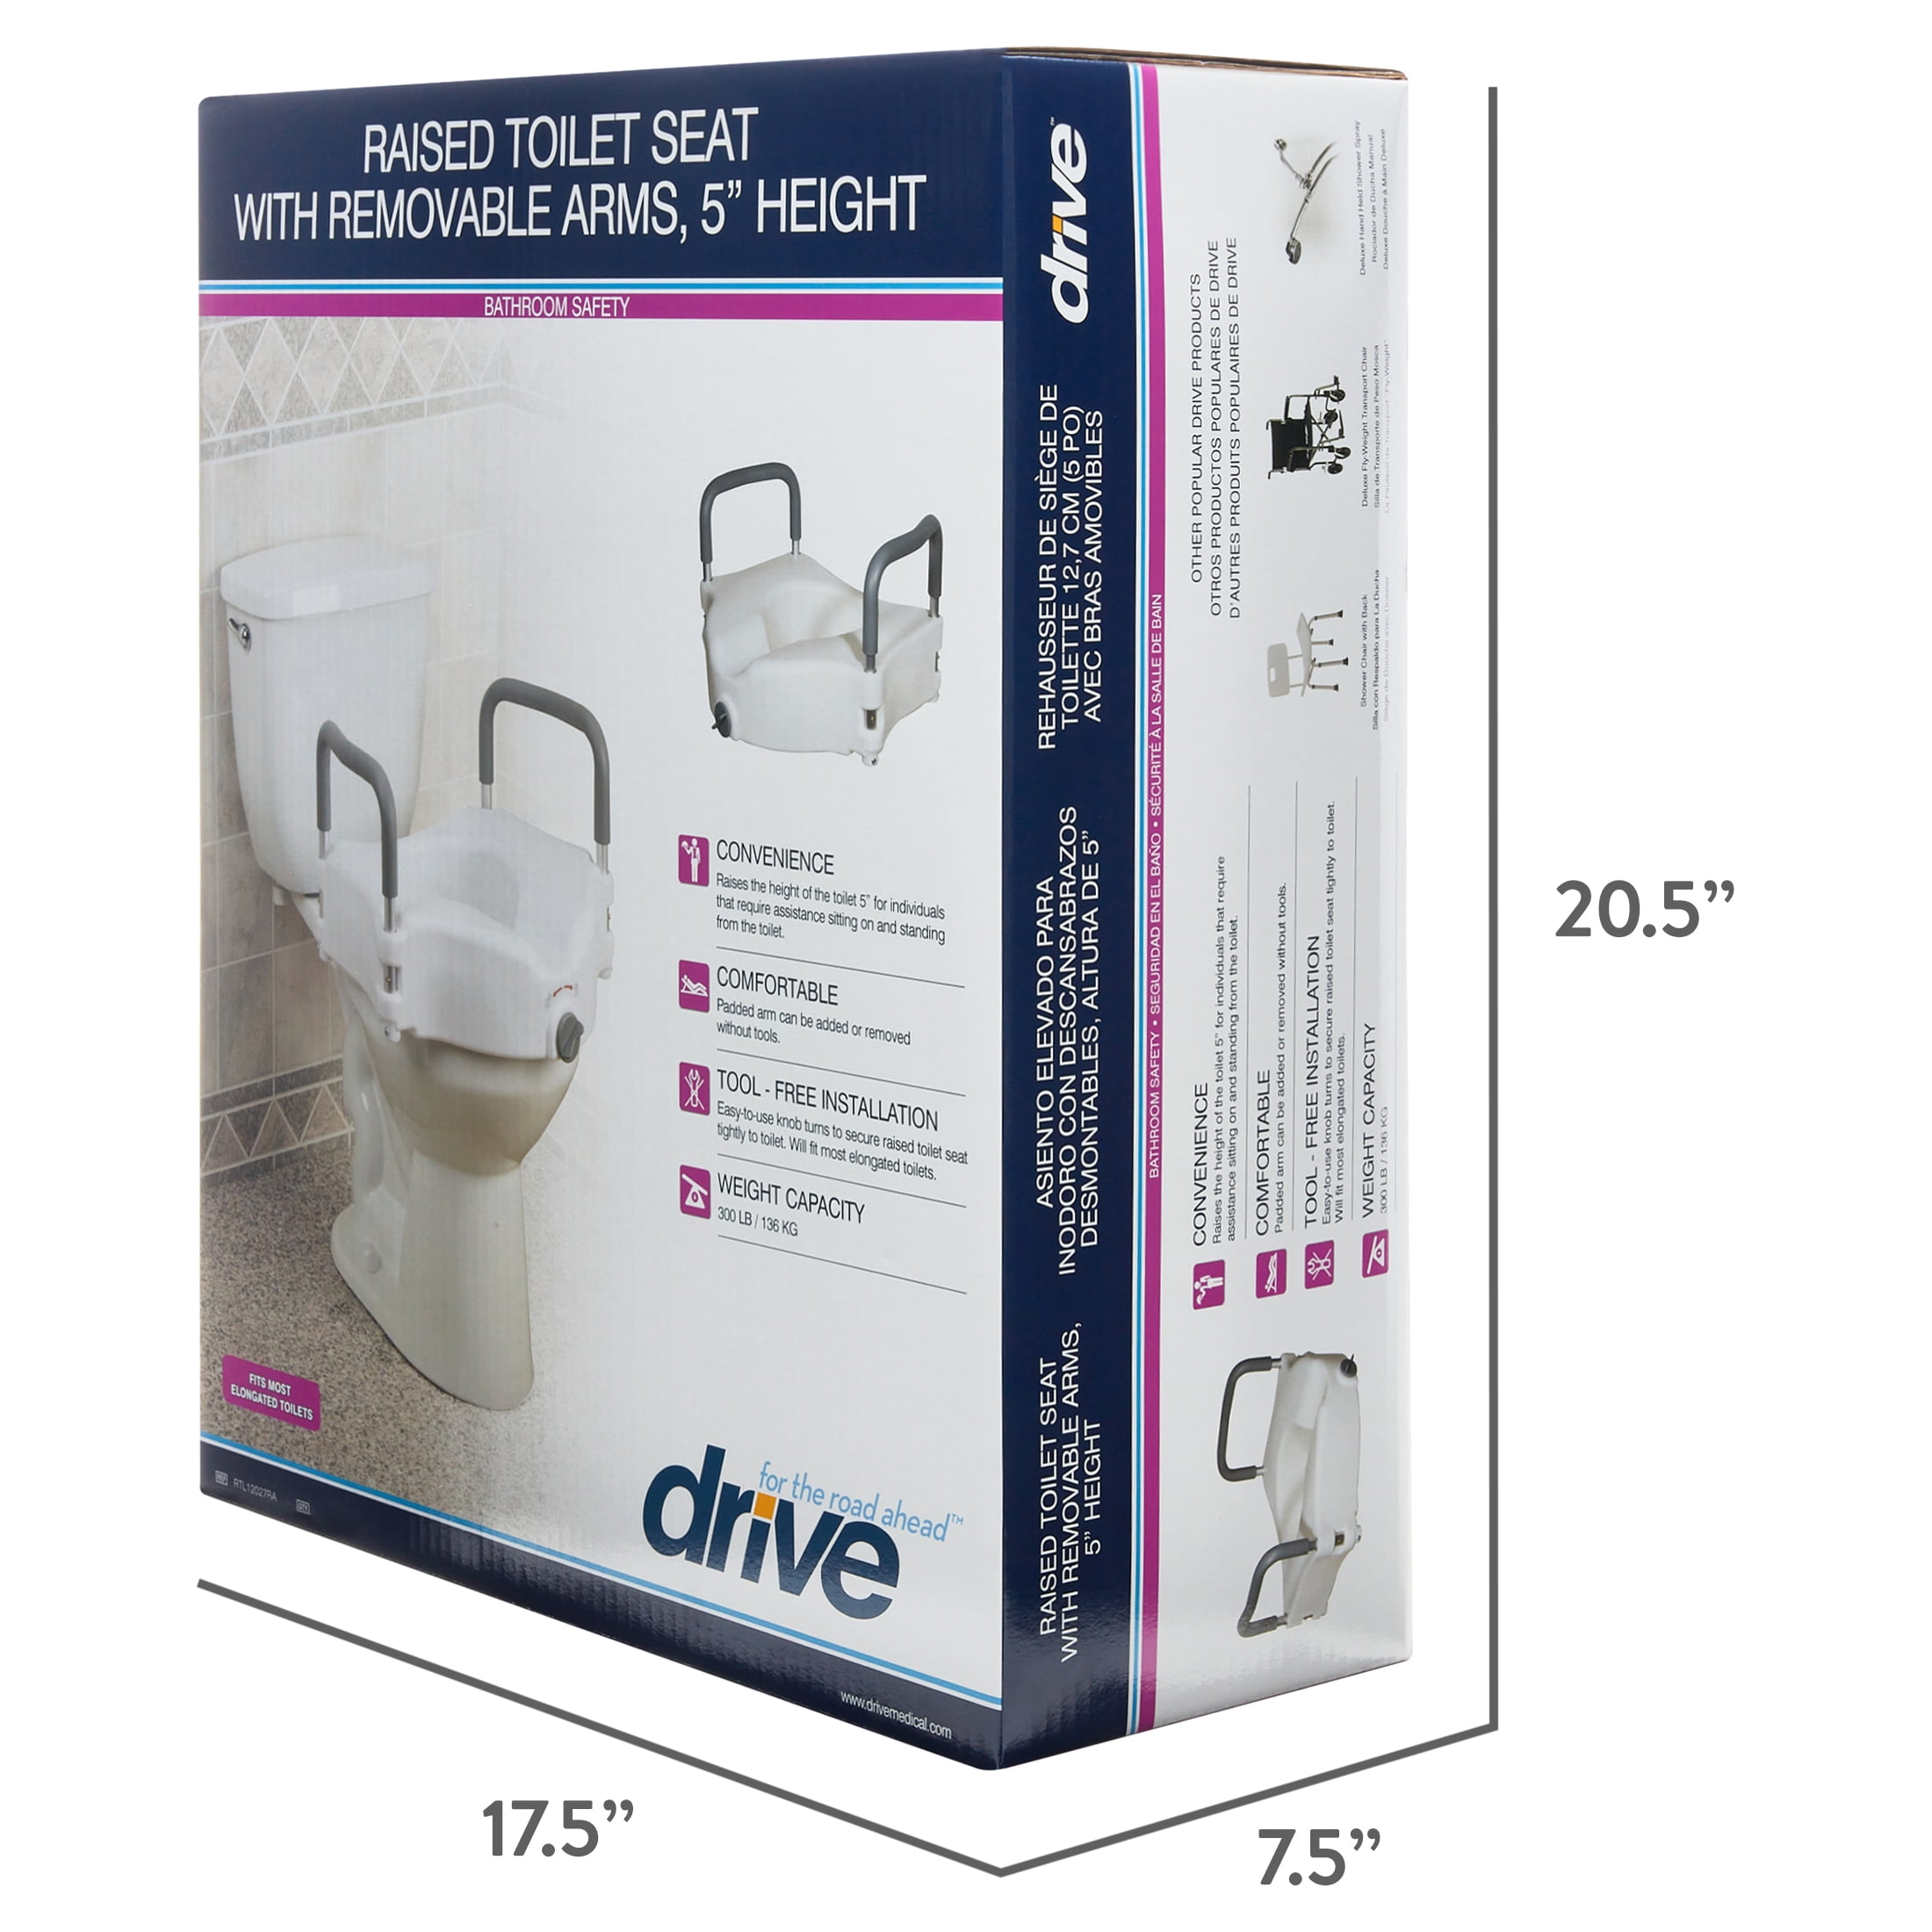 Raised Toilet Seat,Tool-free Removable Arms, Fits Standard Size with Lock  by Drive Medical Model # 12008KDR - Bathroom Safety - Browse Products